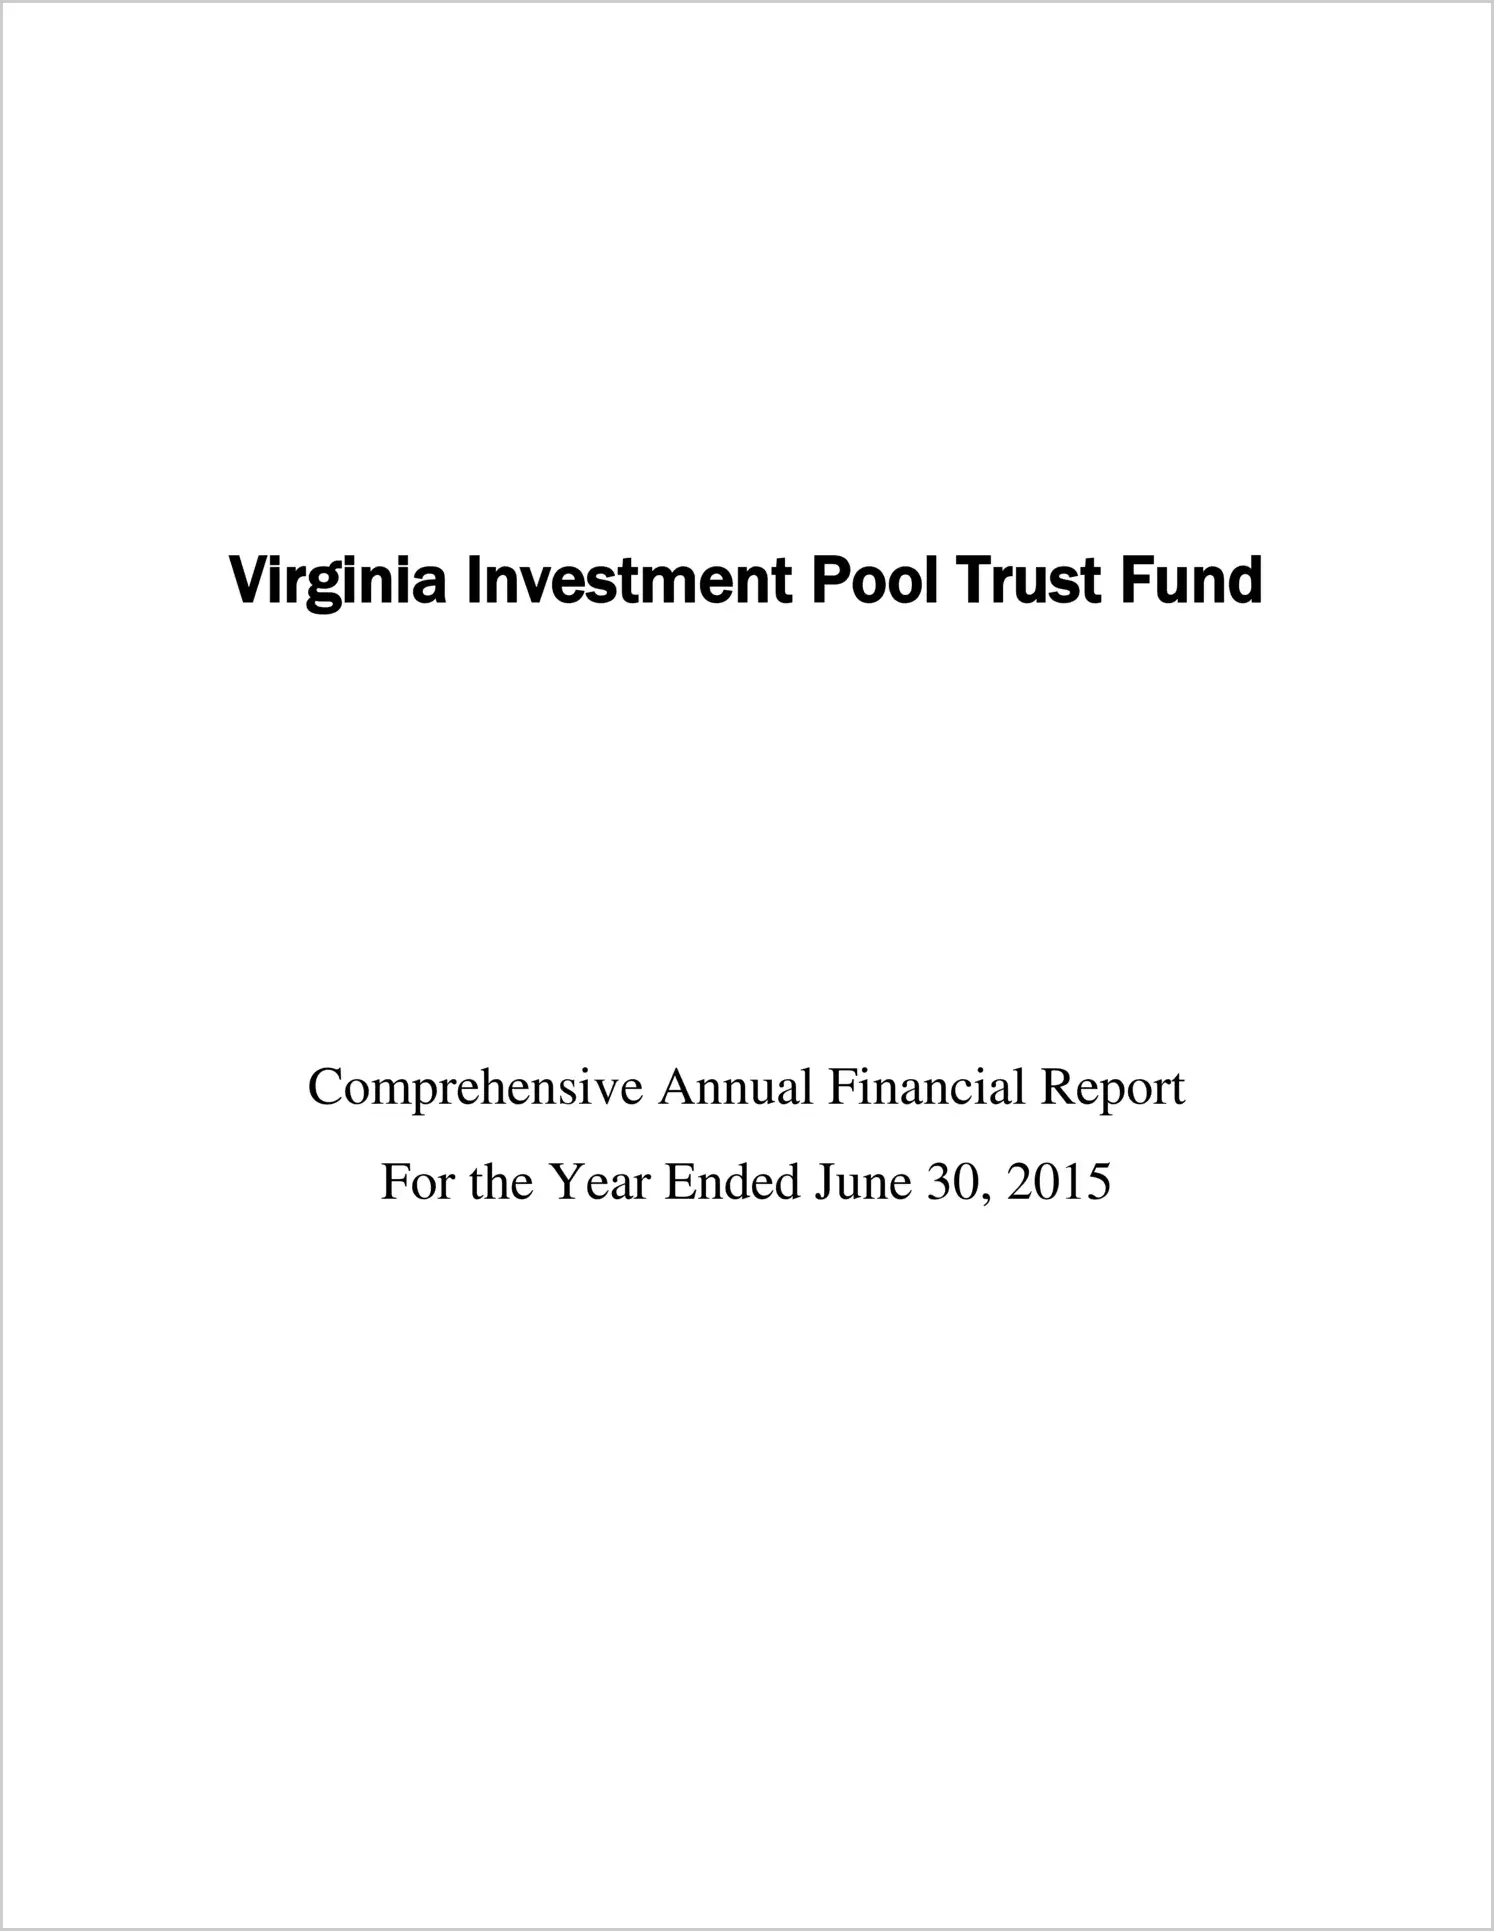 2015 ABC/Other Annual Financial Report  for Virginia Investment Pool Trust Fund